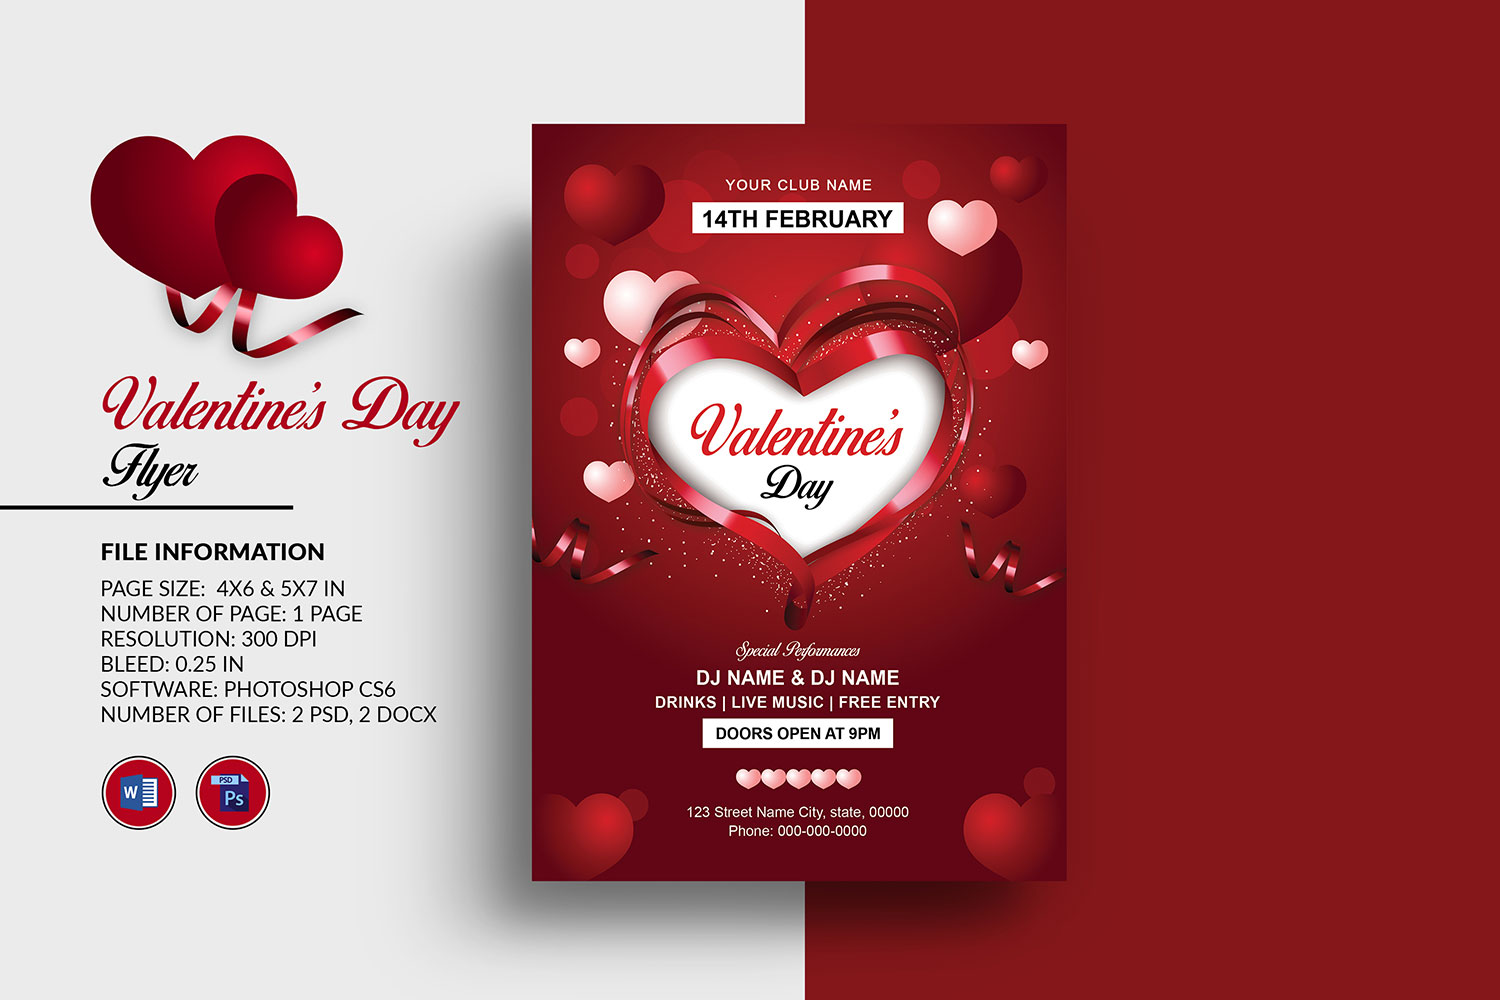 Valentine's Day Party Invitation Flyer - Corporate Identity Template